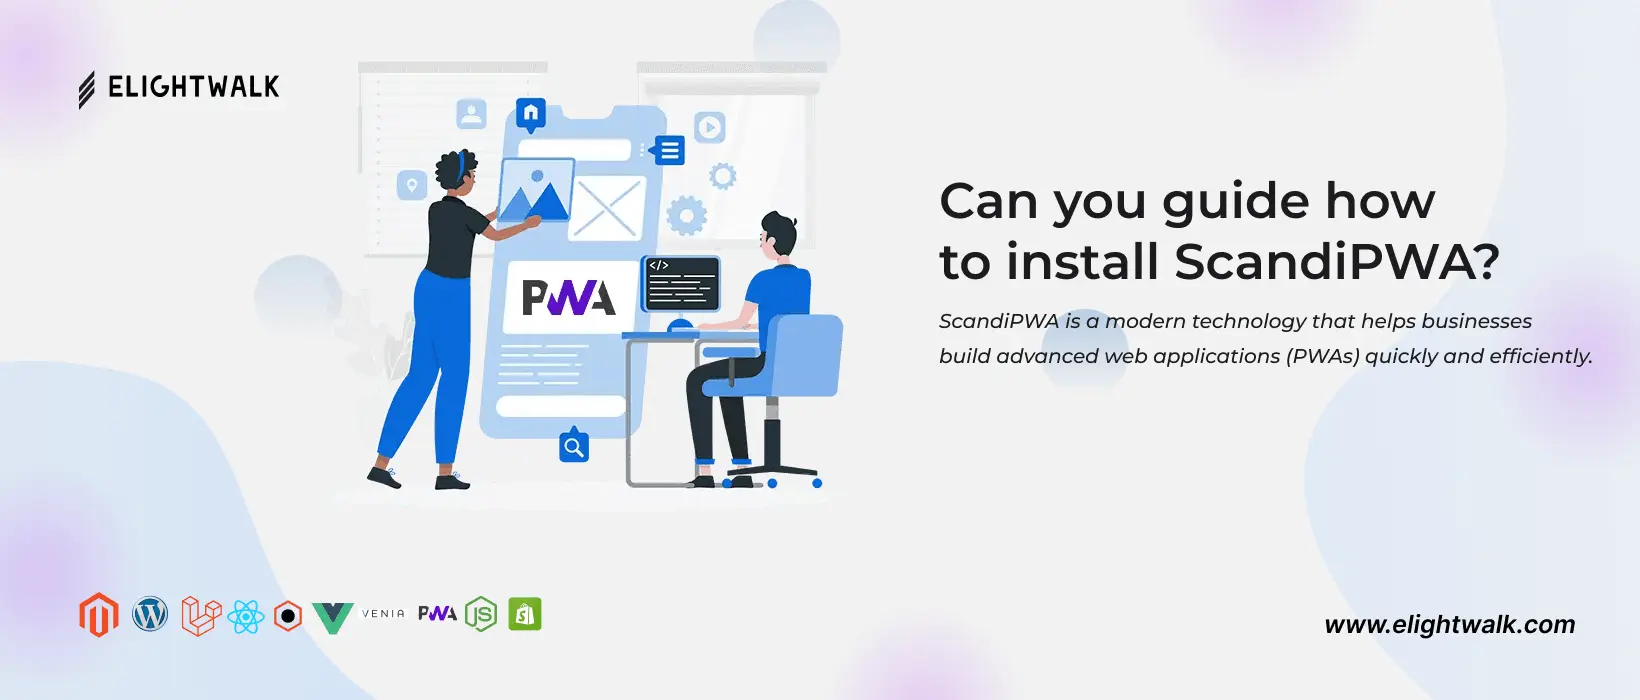 Can you guide how to install ScandiPWA?